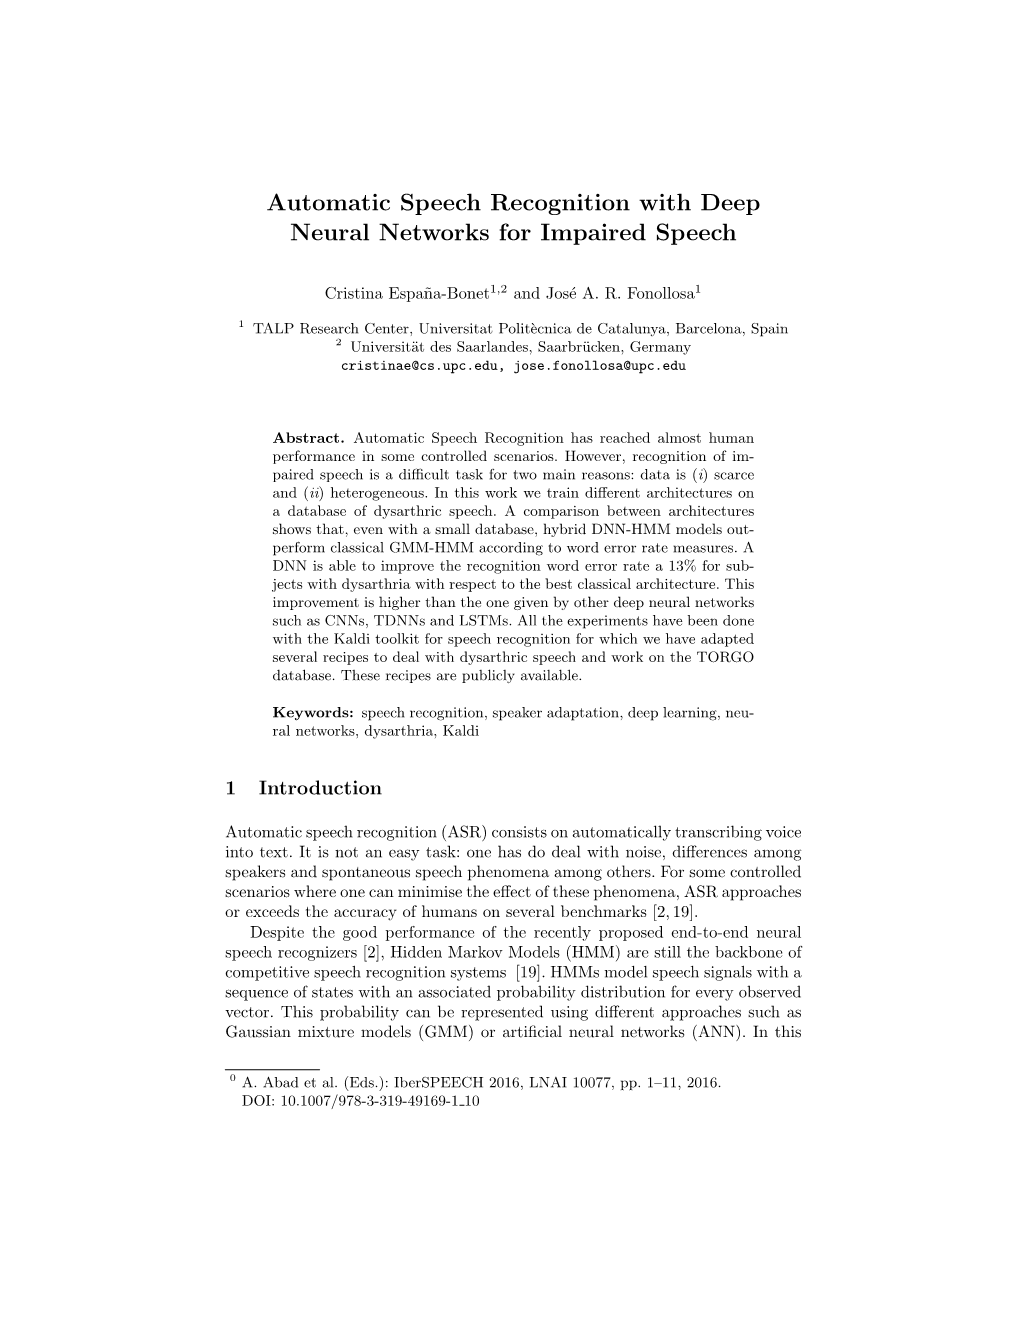 Automatic Speech Recognition with Deep Neural Networks for Impaired Speech